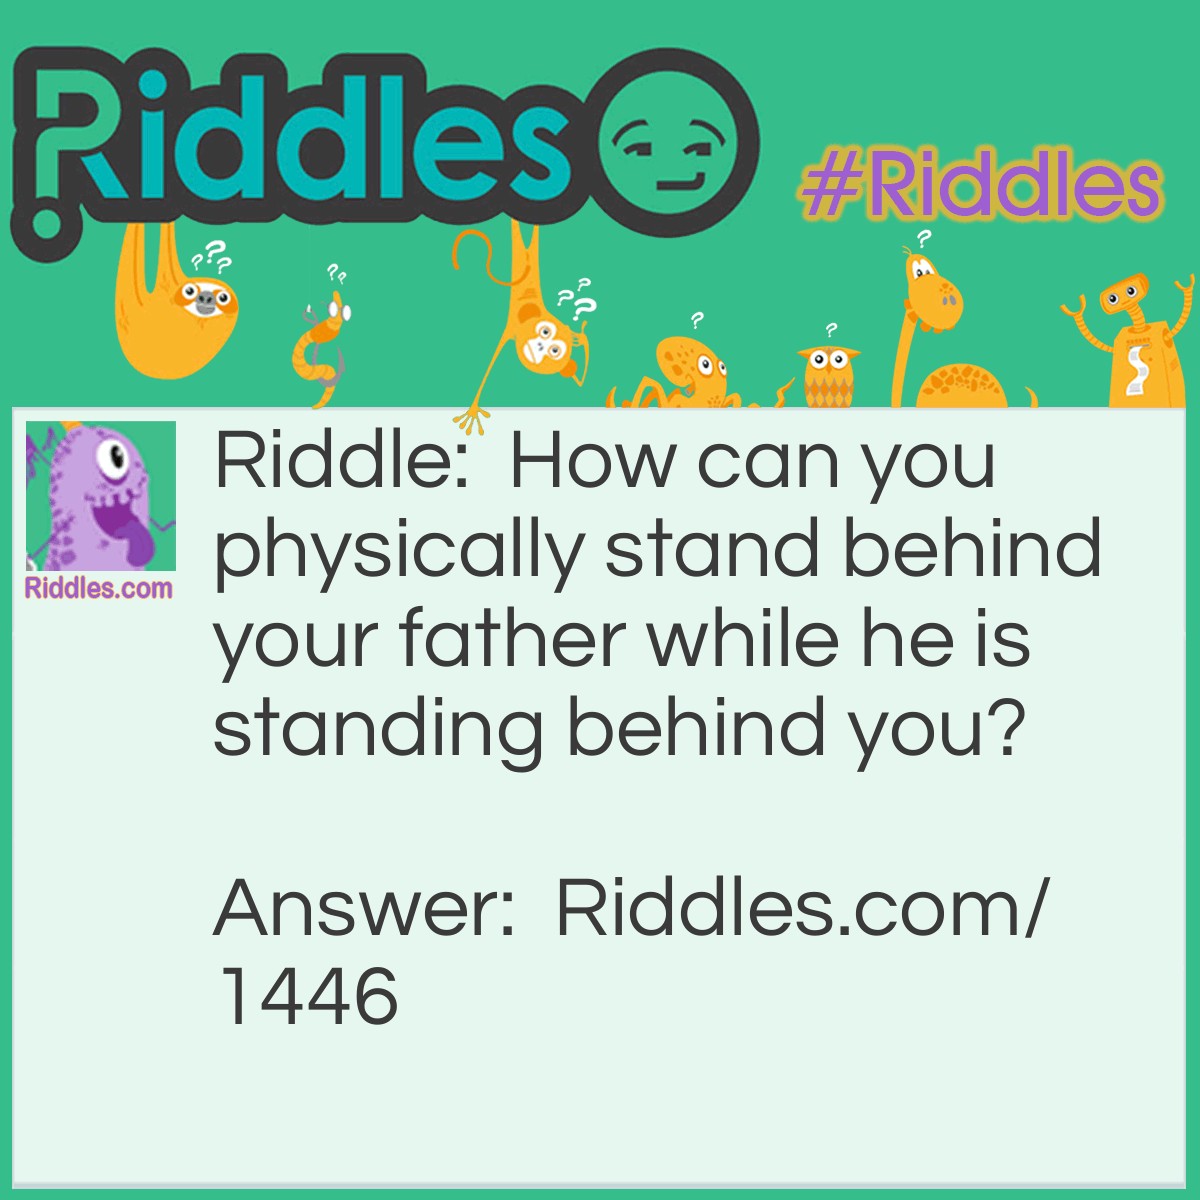 Riddle: How can you physically stand behind your father while he is standing behind you? Answer: You both must be standing back to back.